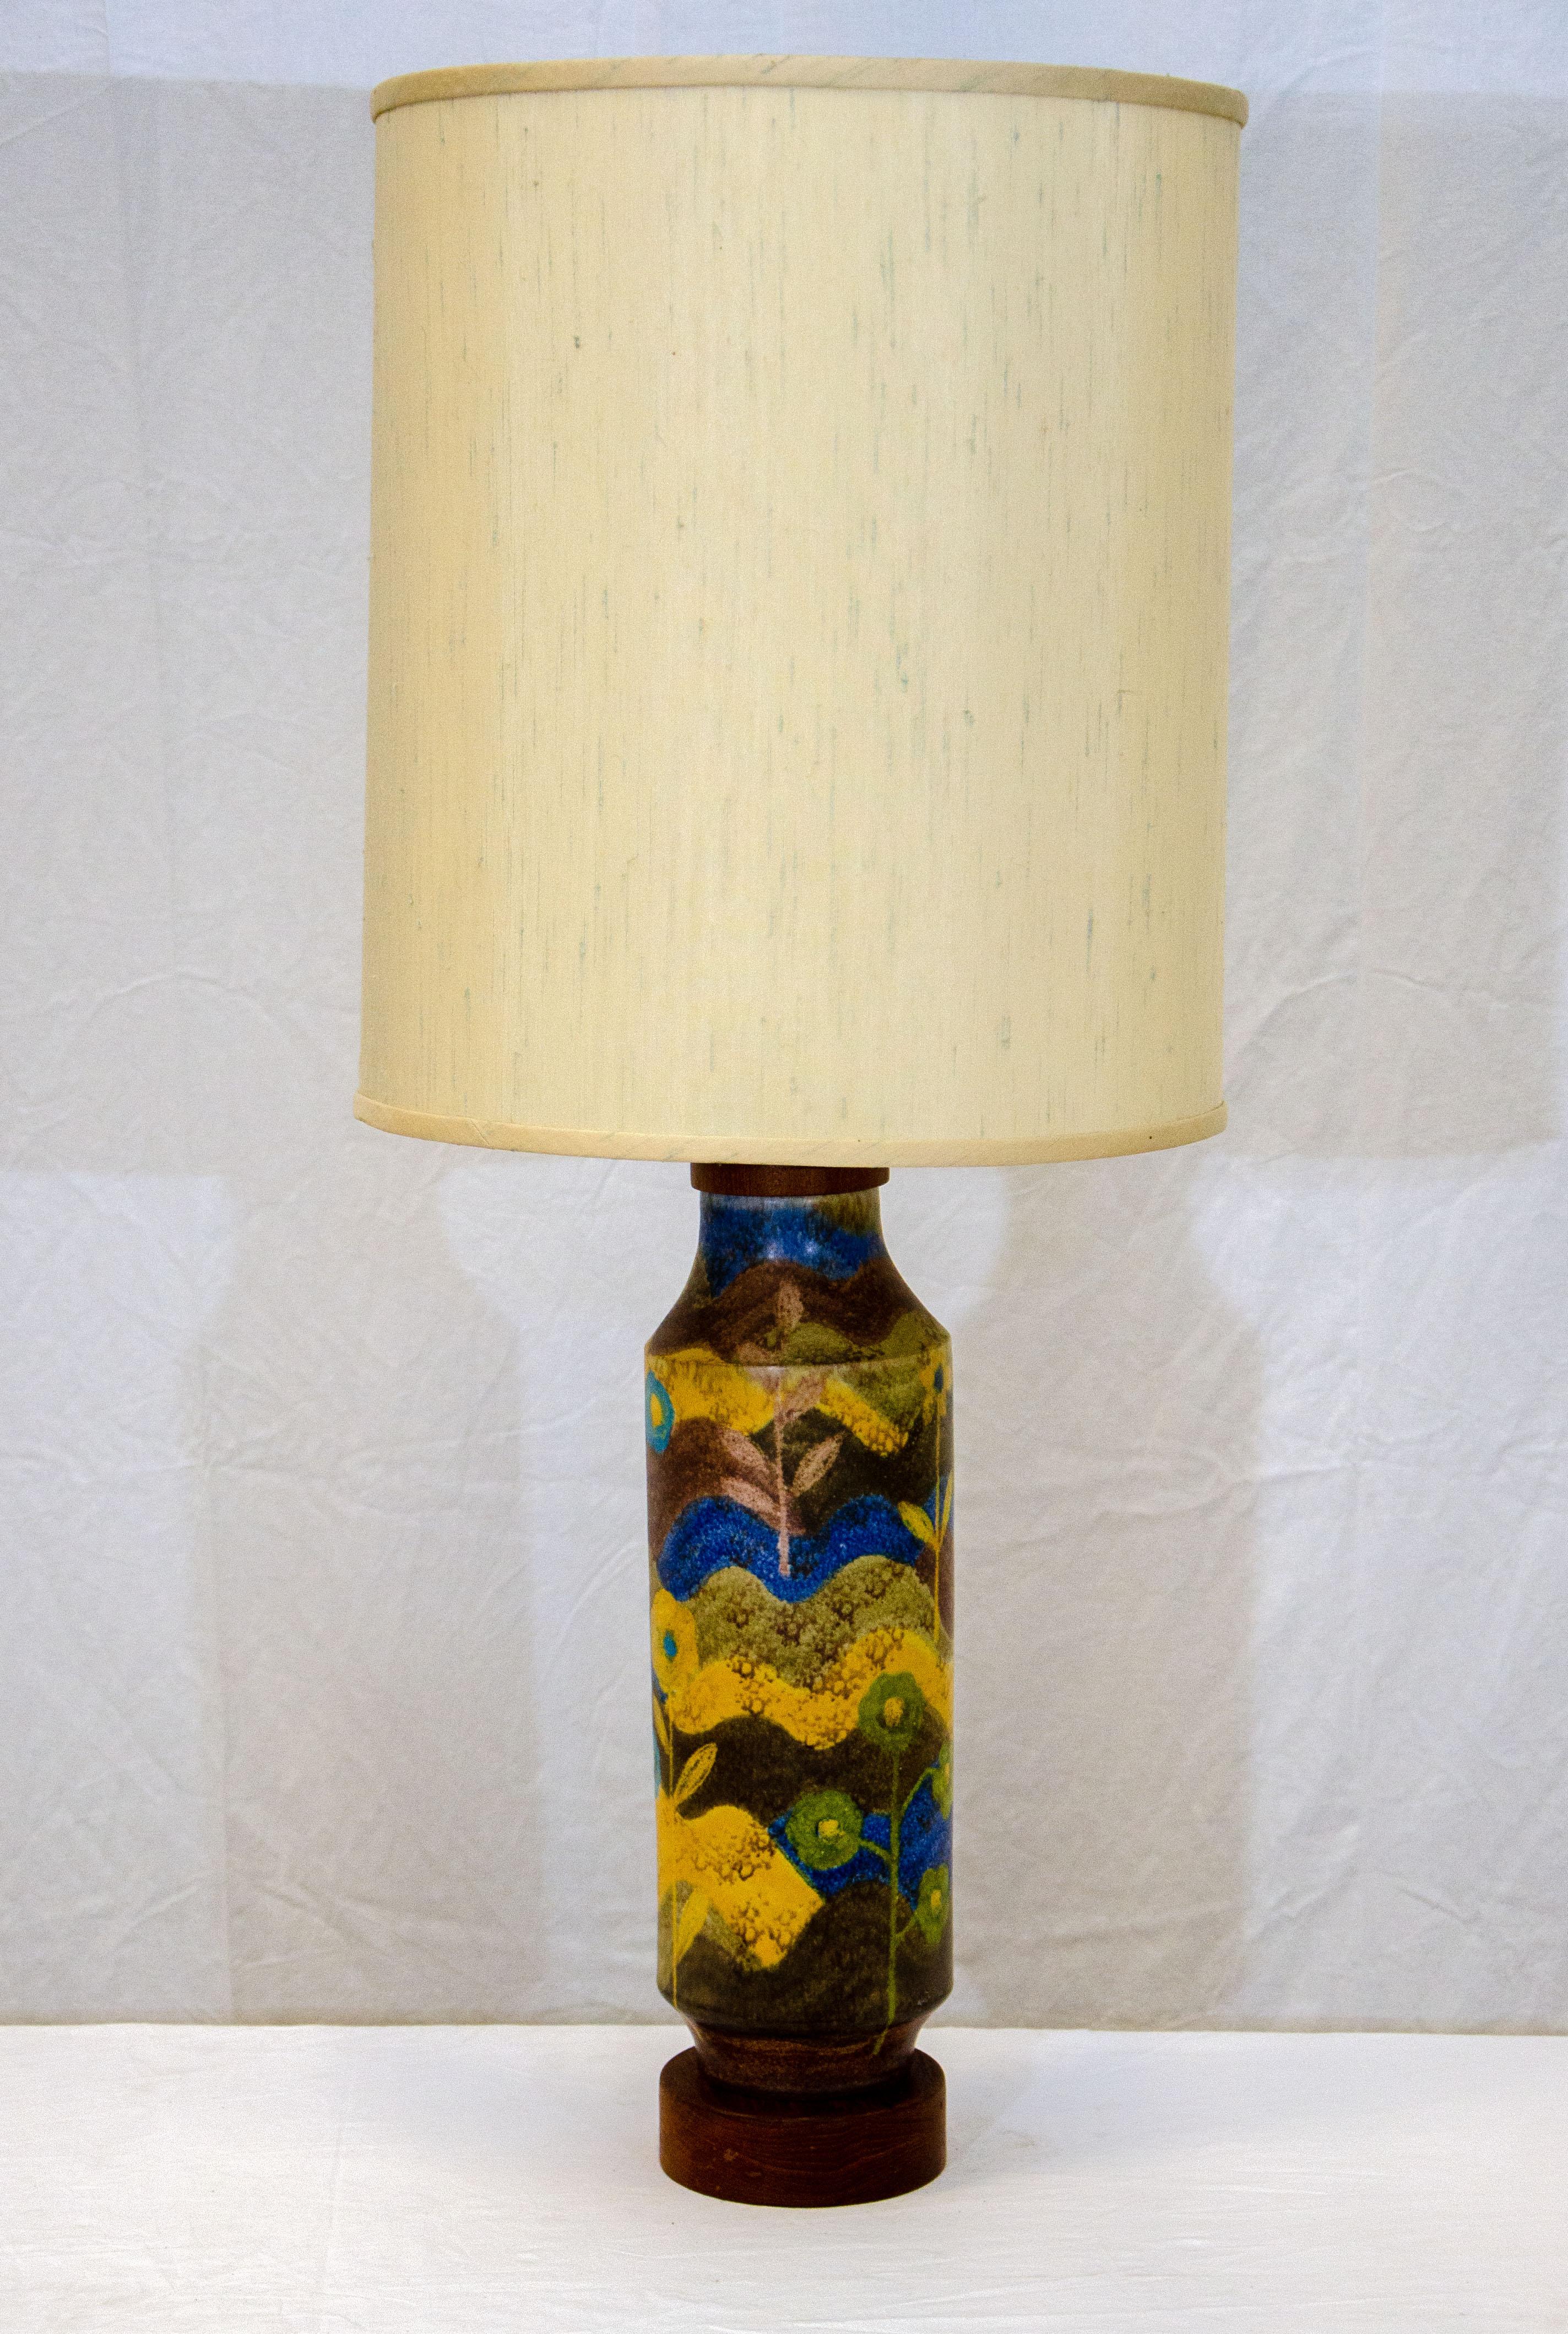 Very nice studio pottery lamp with a walnut base and top, a cylindrical body stylized with a leaf and flower design using alternating colors of blue, green, yellow, brown, and white. The wooden base is 1 3/4